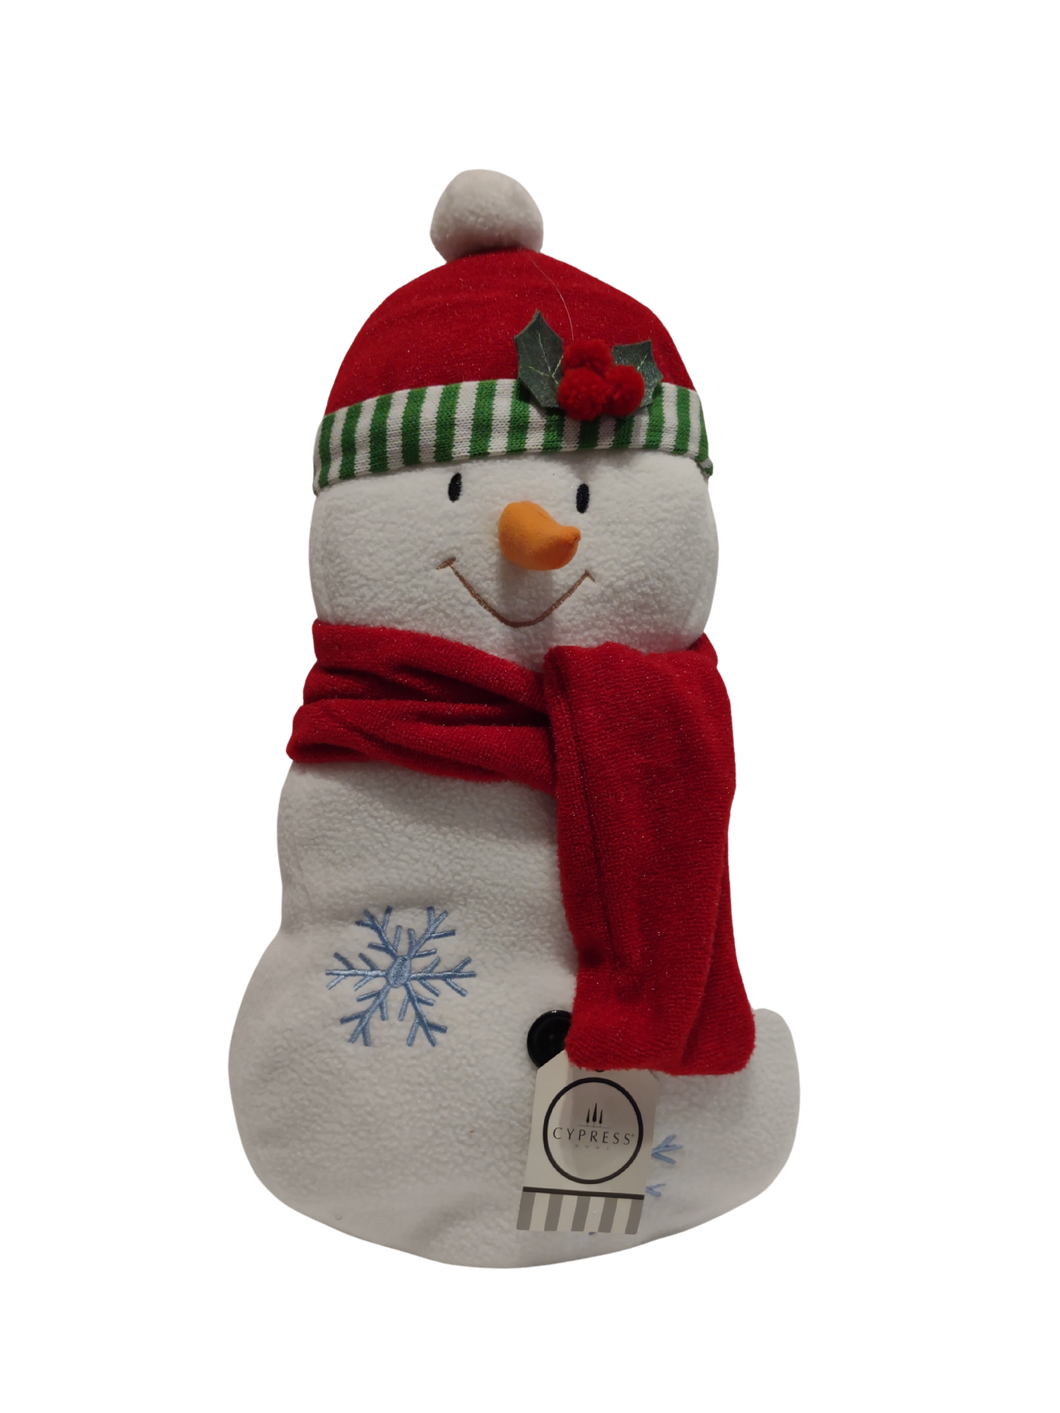 Snowman Pillow with Red Hat/Red Scarf/Blue Snowflakes 10